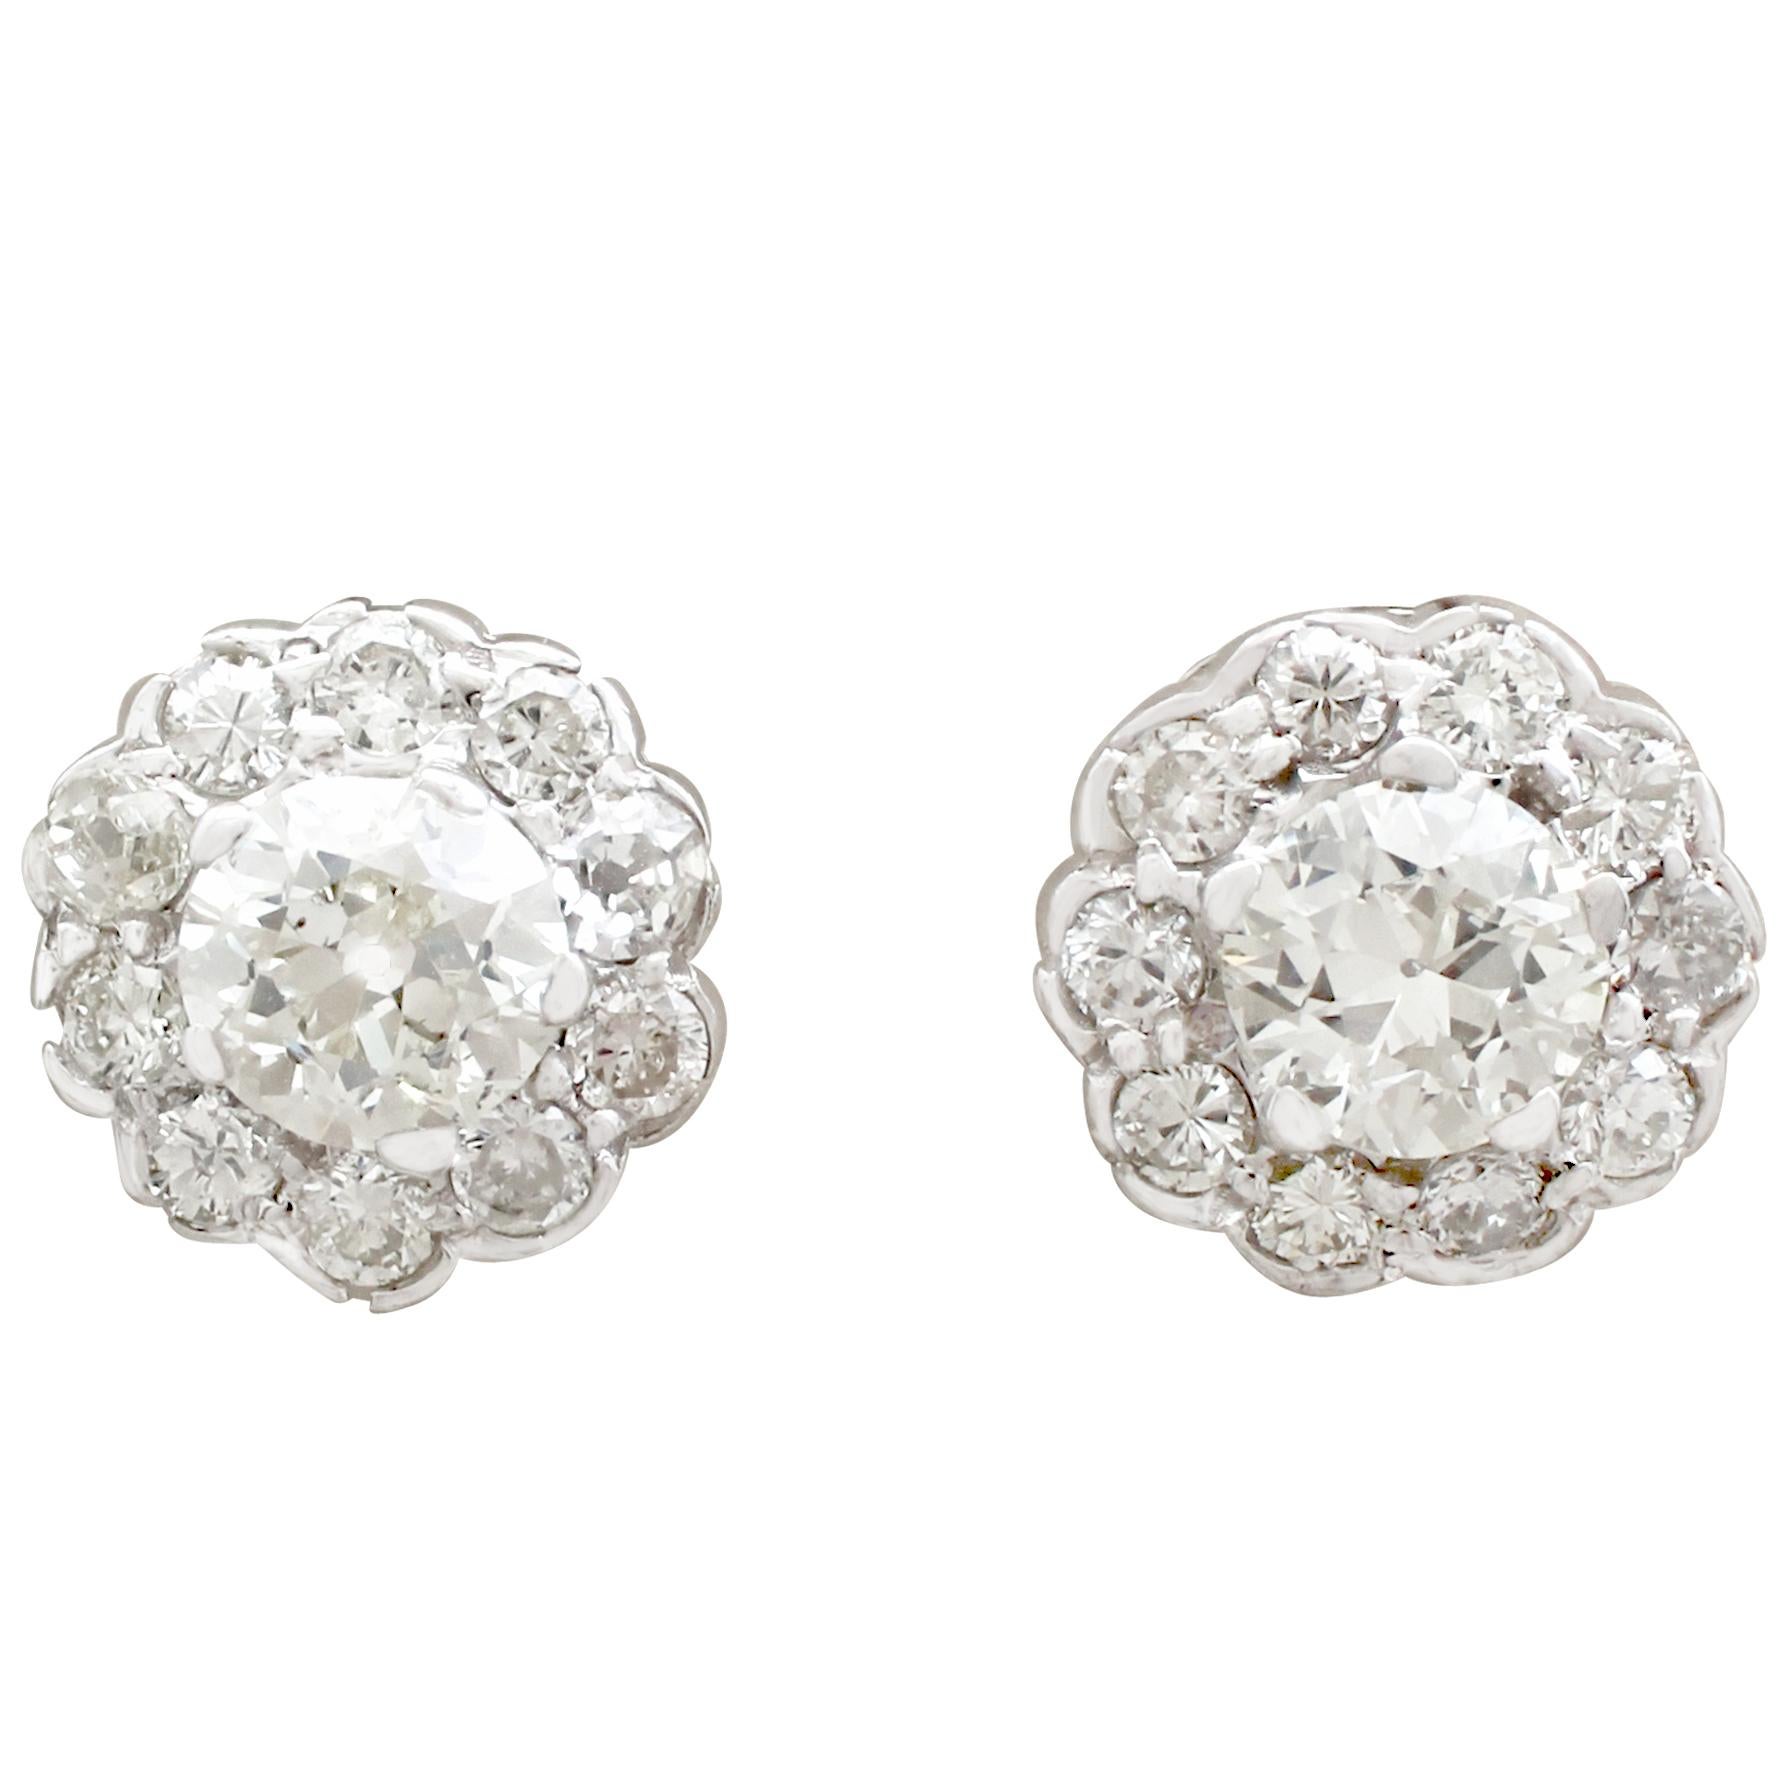 Antique 1.87Ct Diamond and White Gold Cluster Earrings 